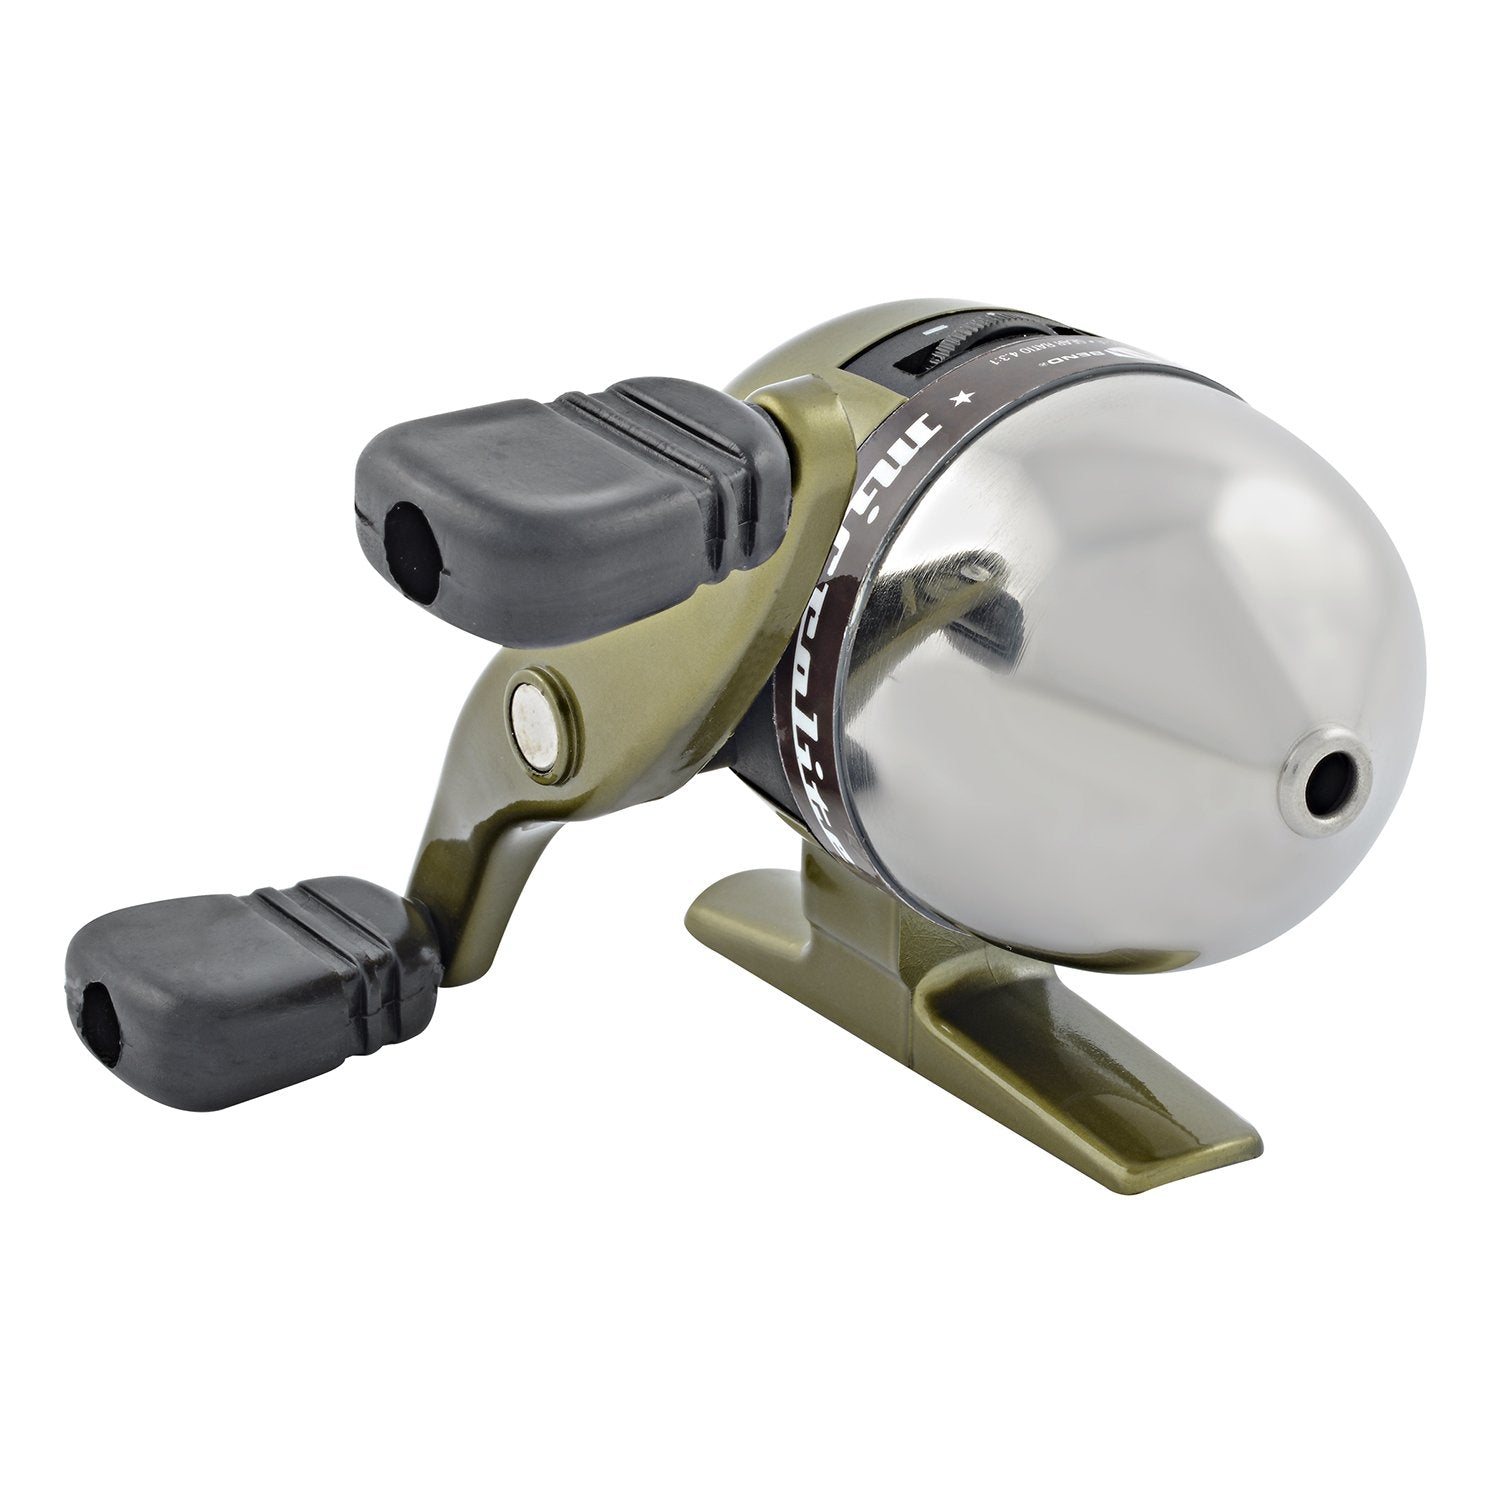 ACCUCAST WIDE ARBOR 5 BEARING ULTRALIGHT SPINNING REEL 